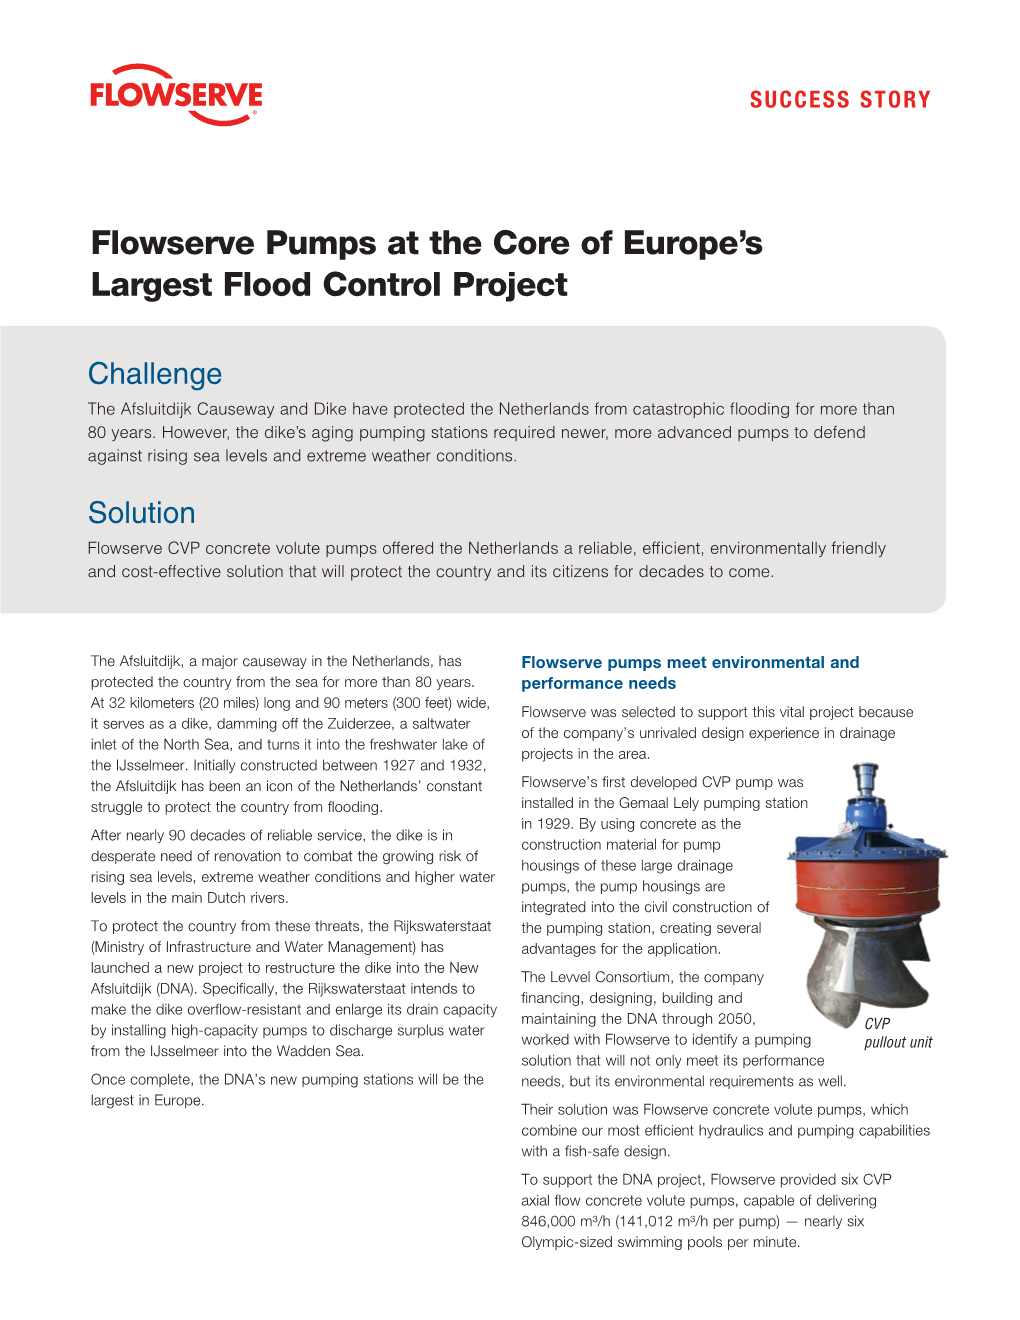 Flowserve Pumps at the Core of Europe's Largest Flood Control Project